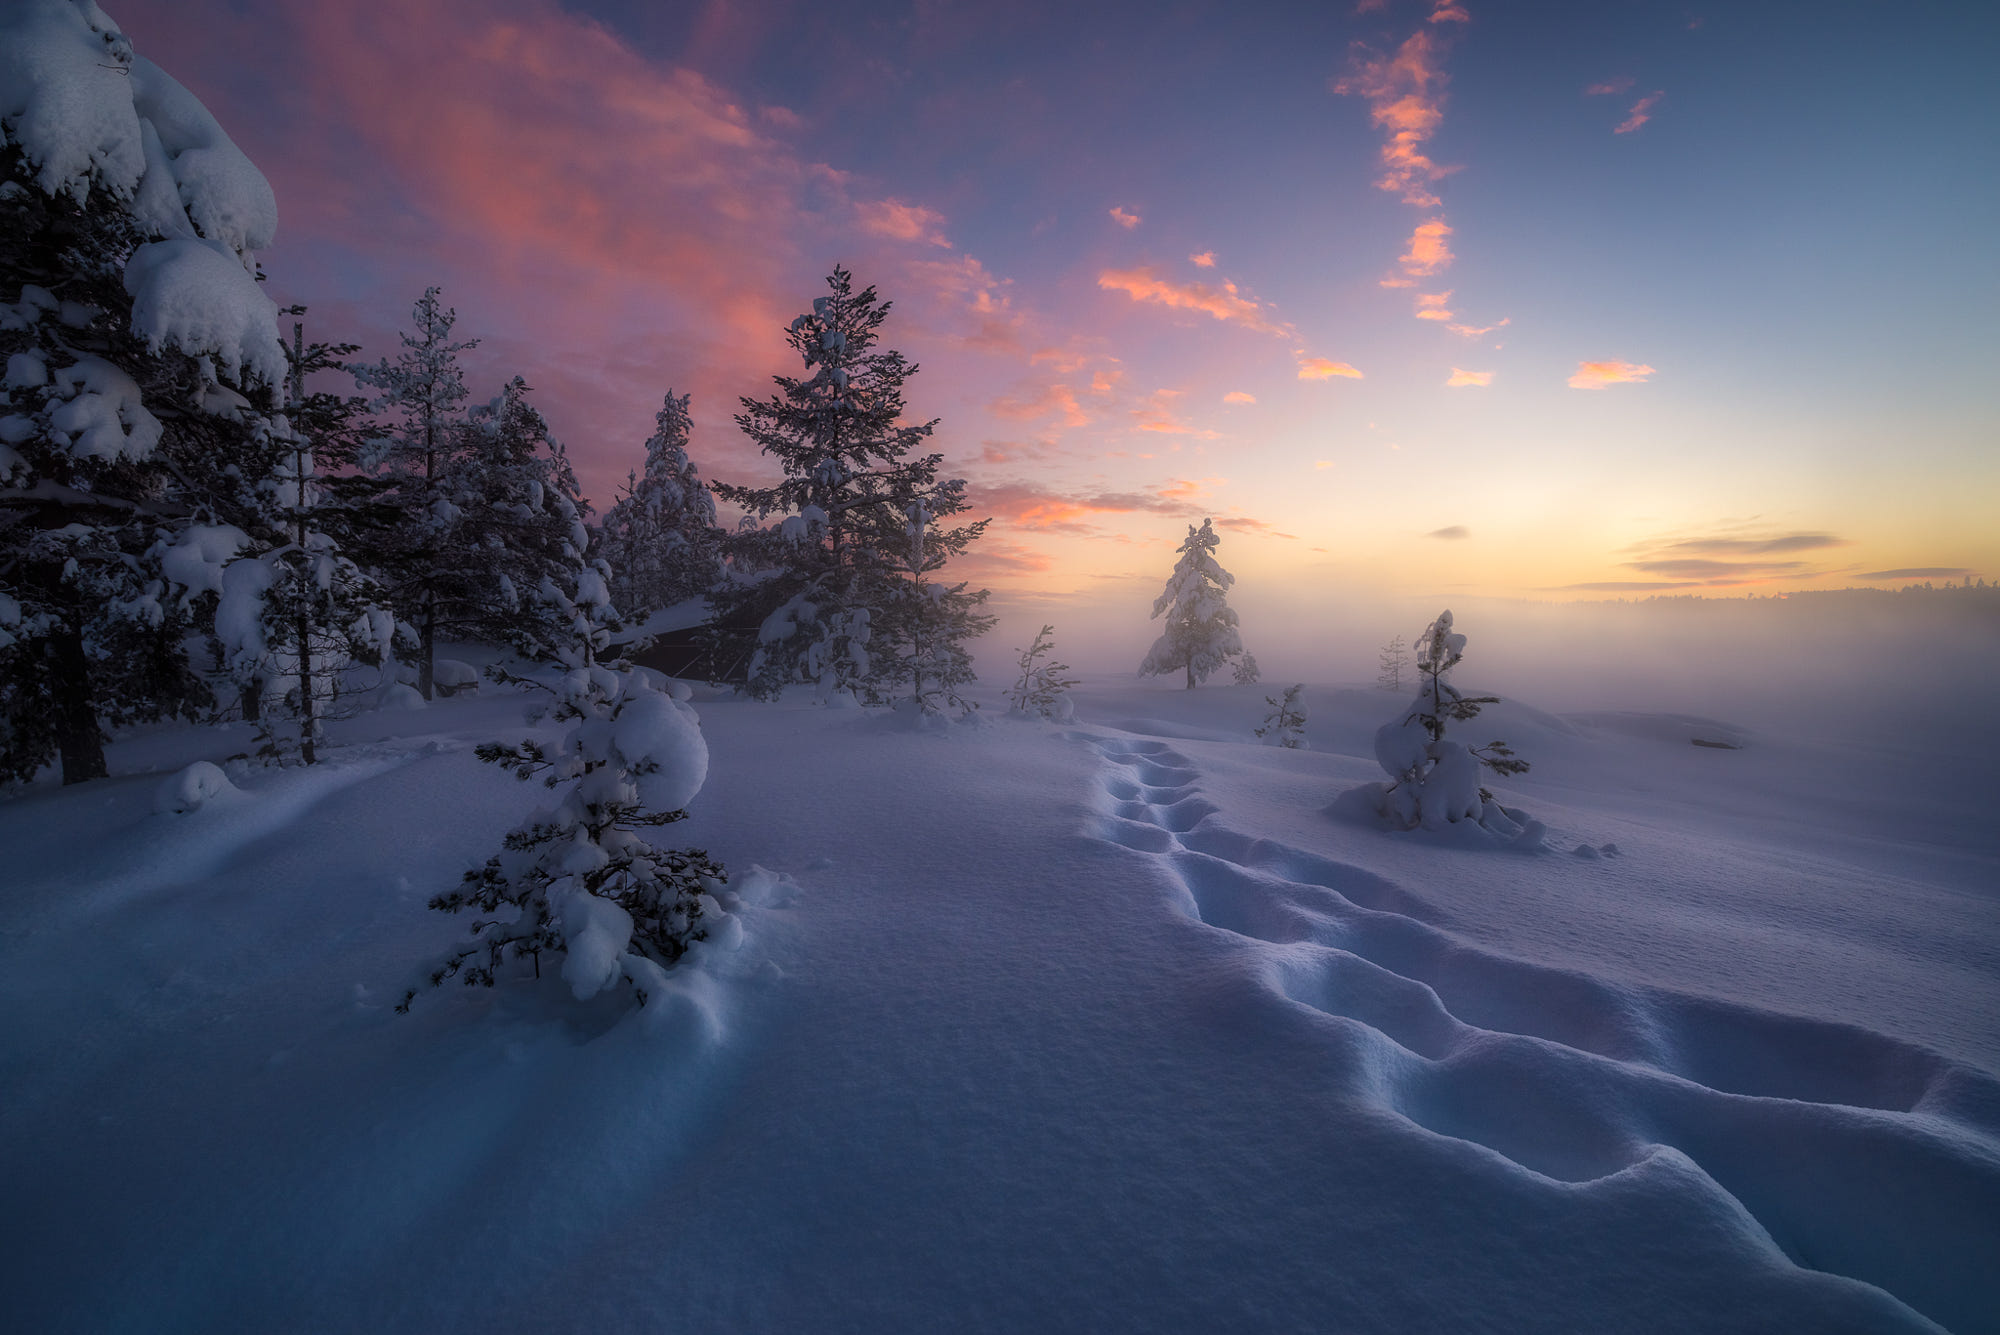 General 2000x1335 depth of field 500px nature snow winter pine trees sunset sun rays landscape sky cold